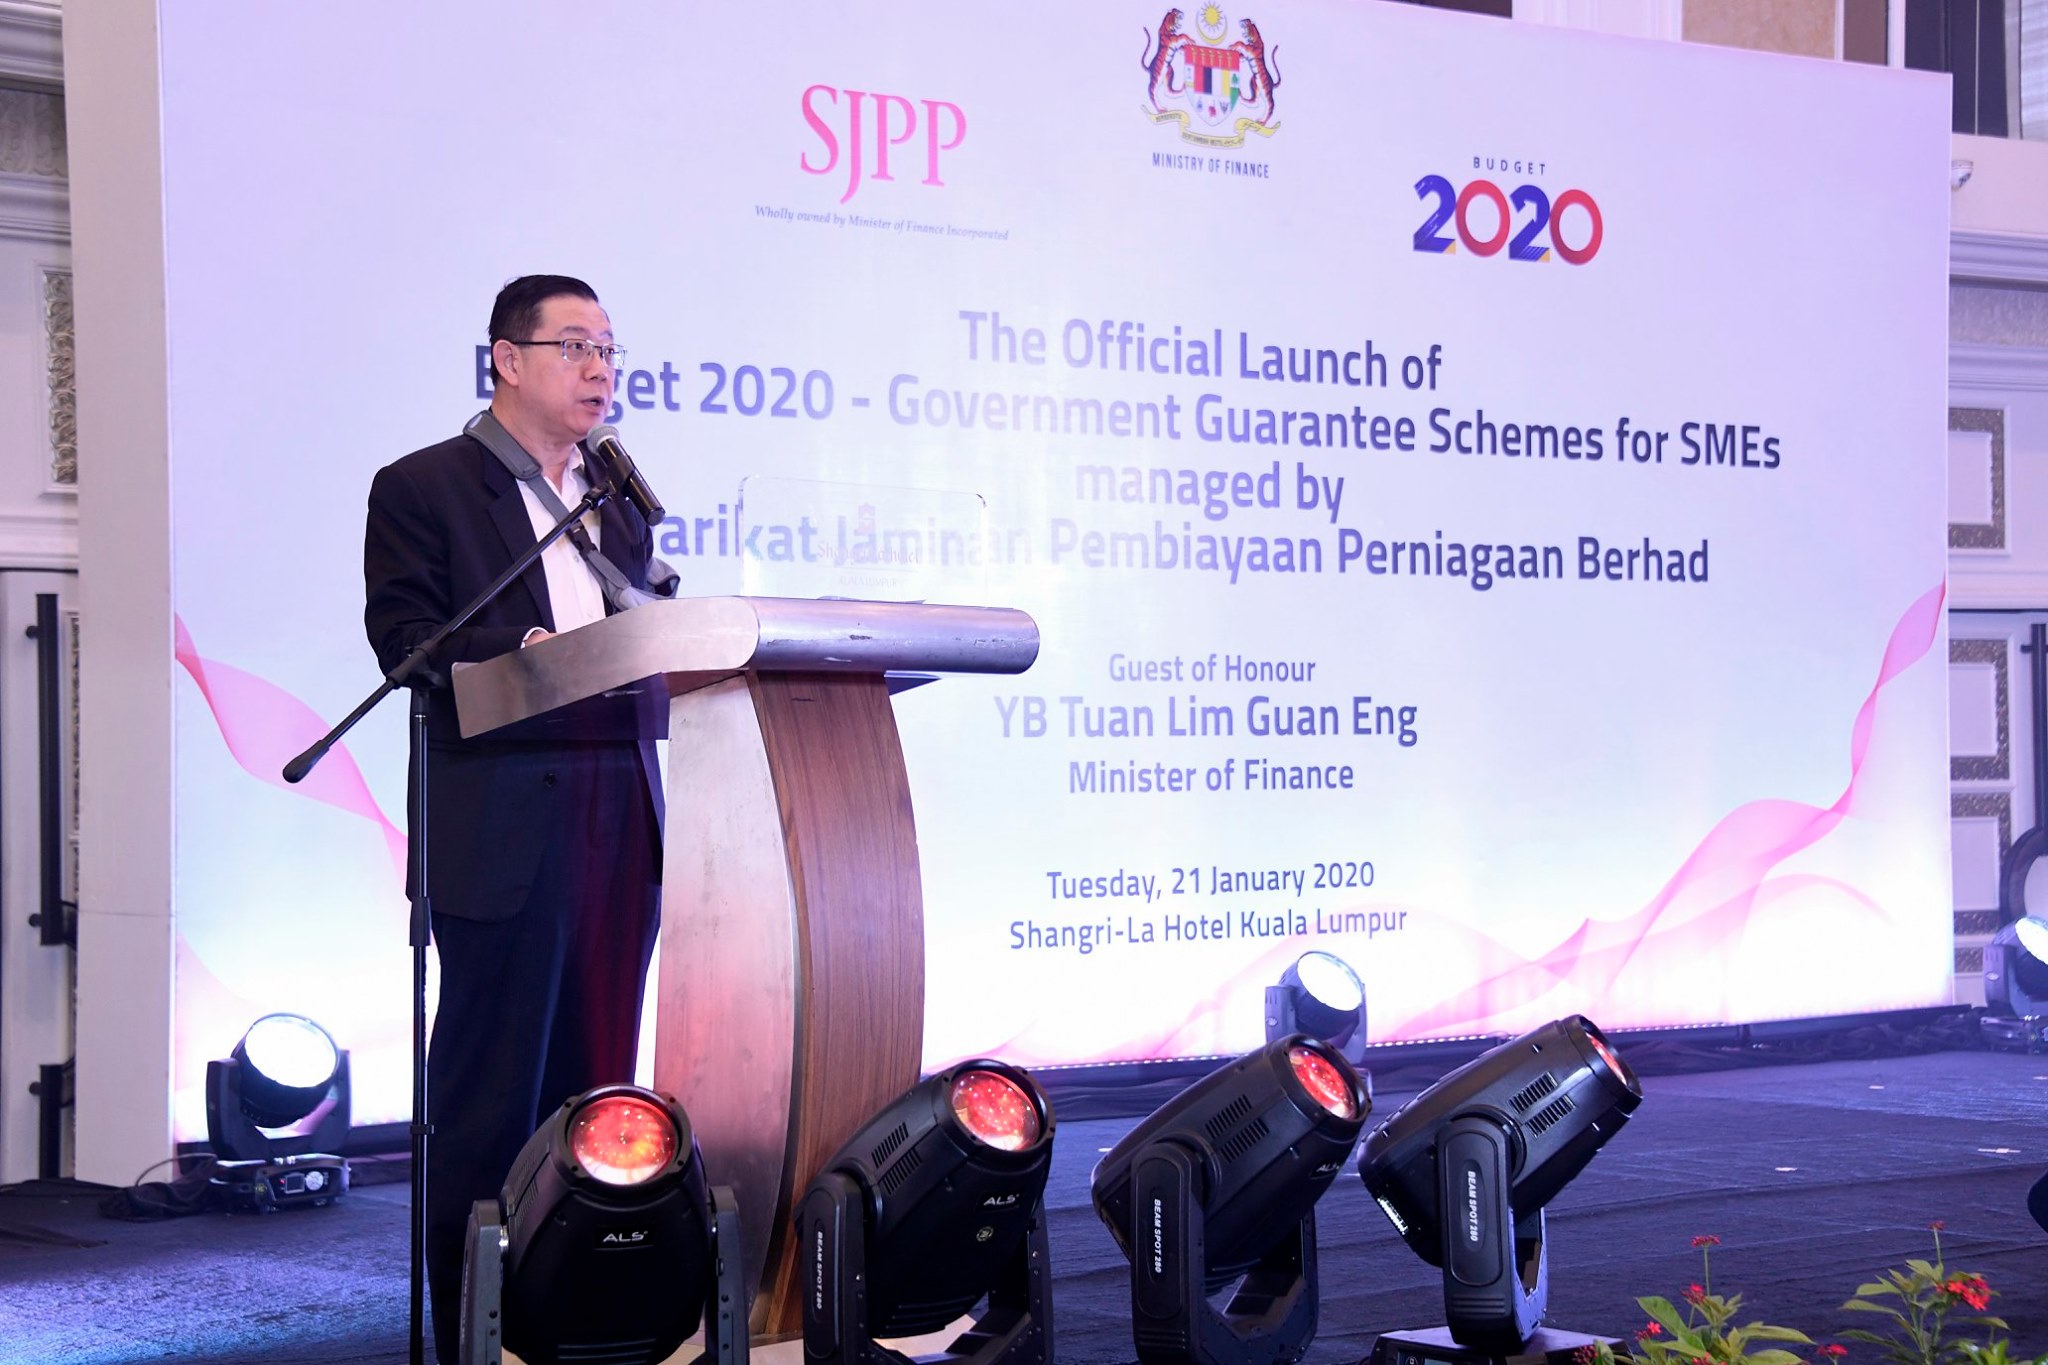 The Official Launch of Budget 2020- Government Guarantee Schemes for SMEs